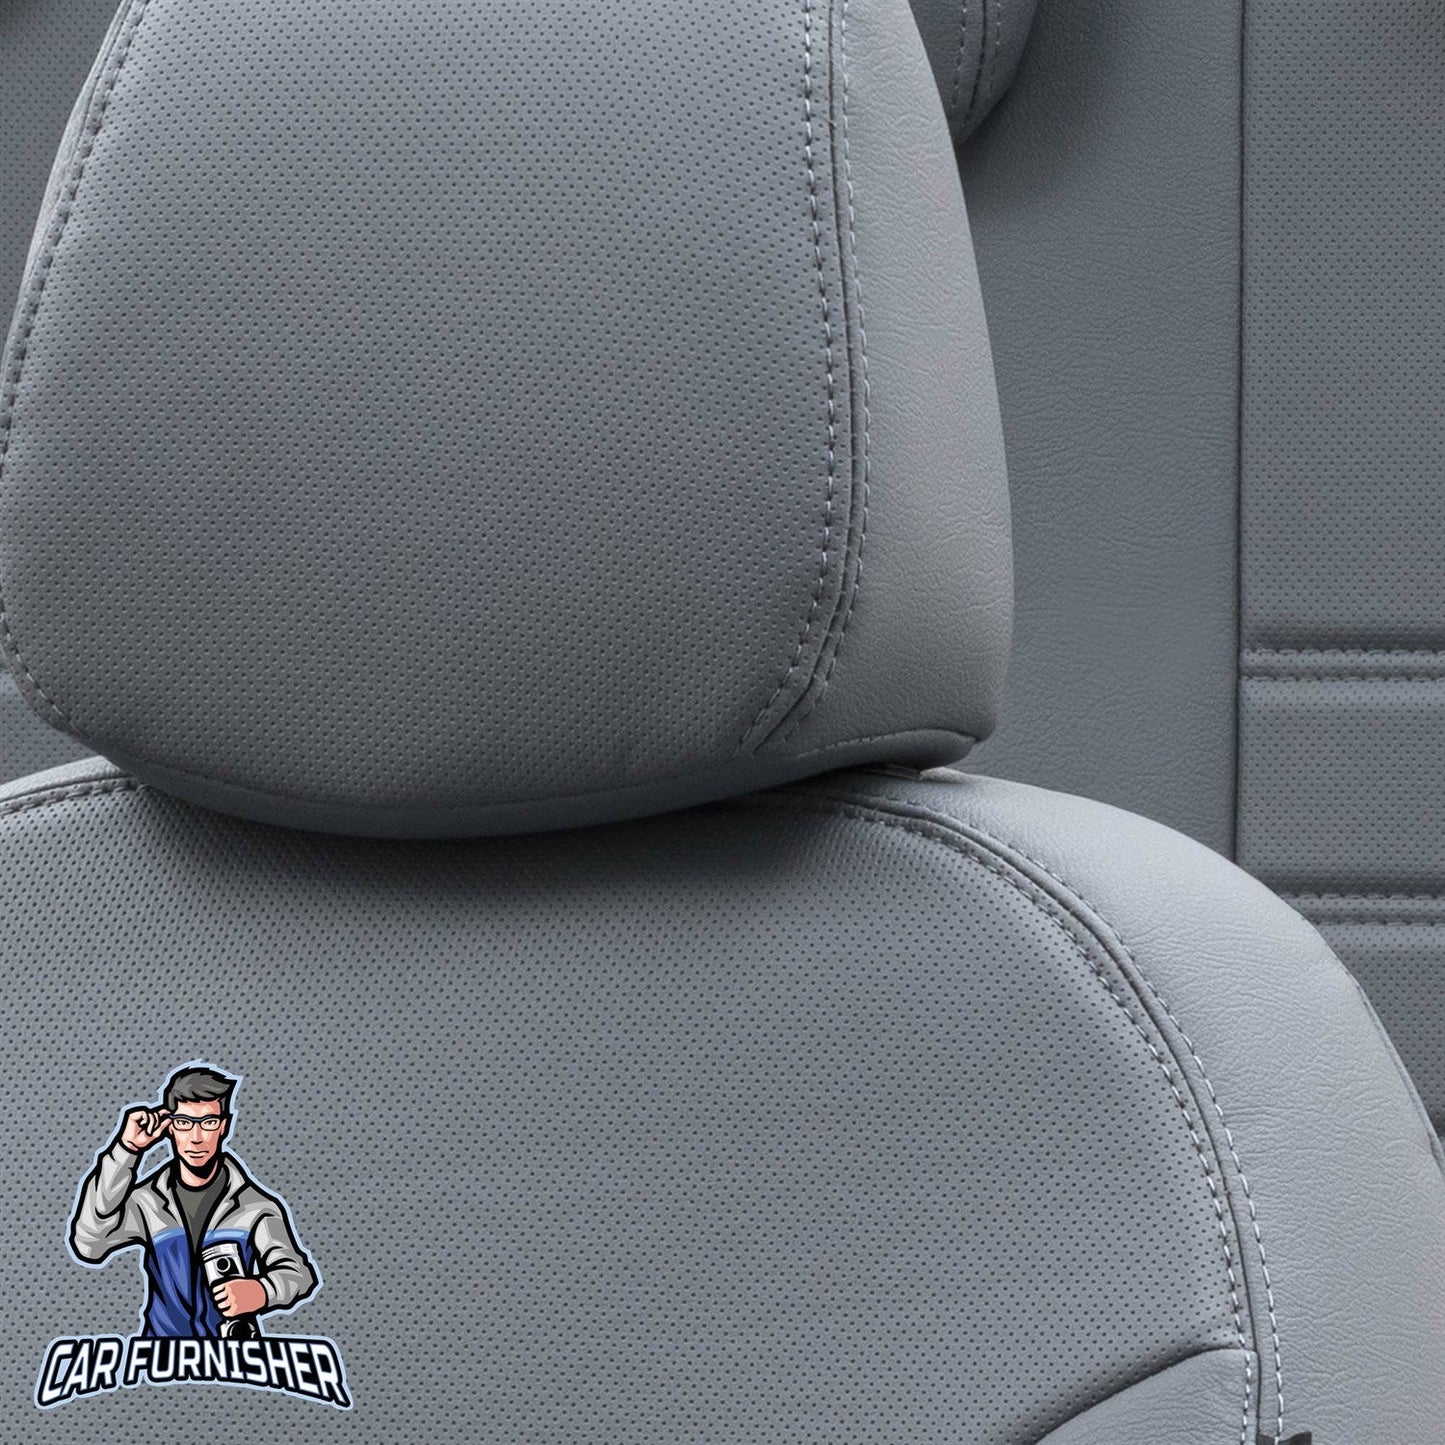 Volvo S80 Seat Cover Istanbul Leather Design Smoked Leather